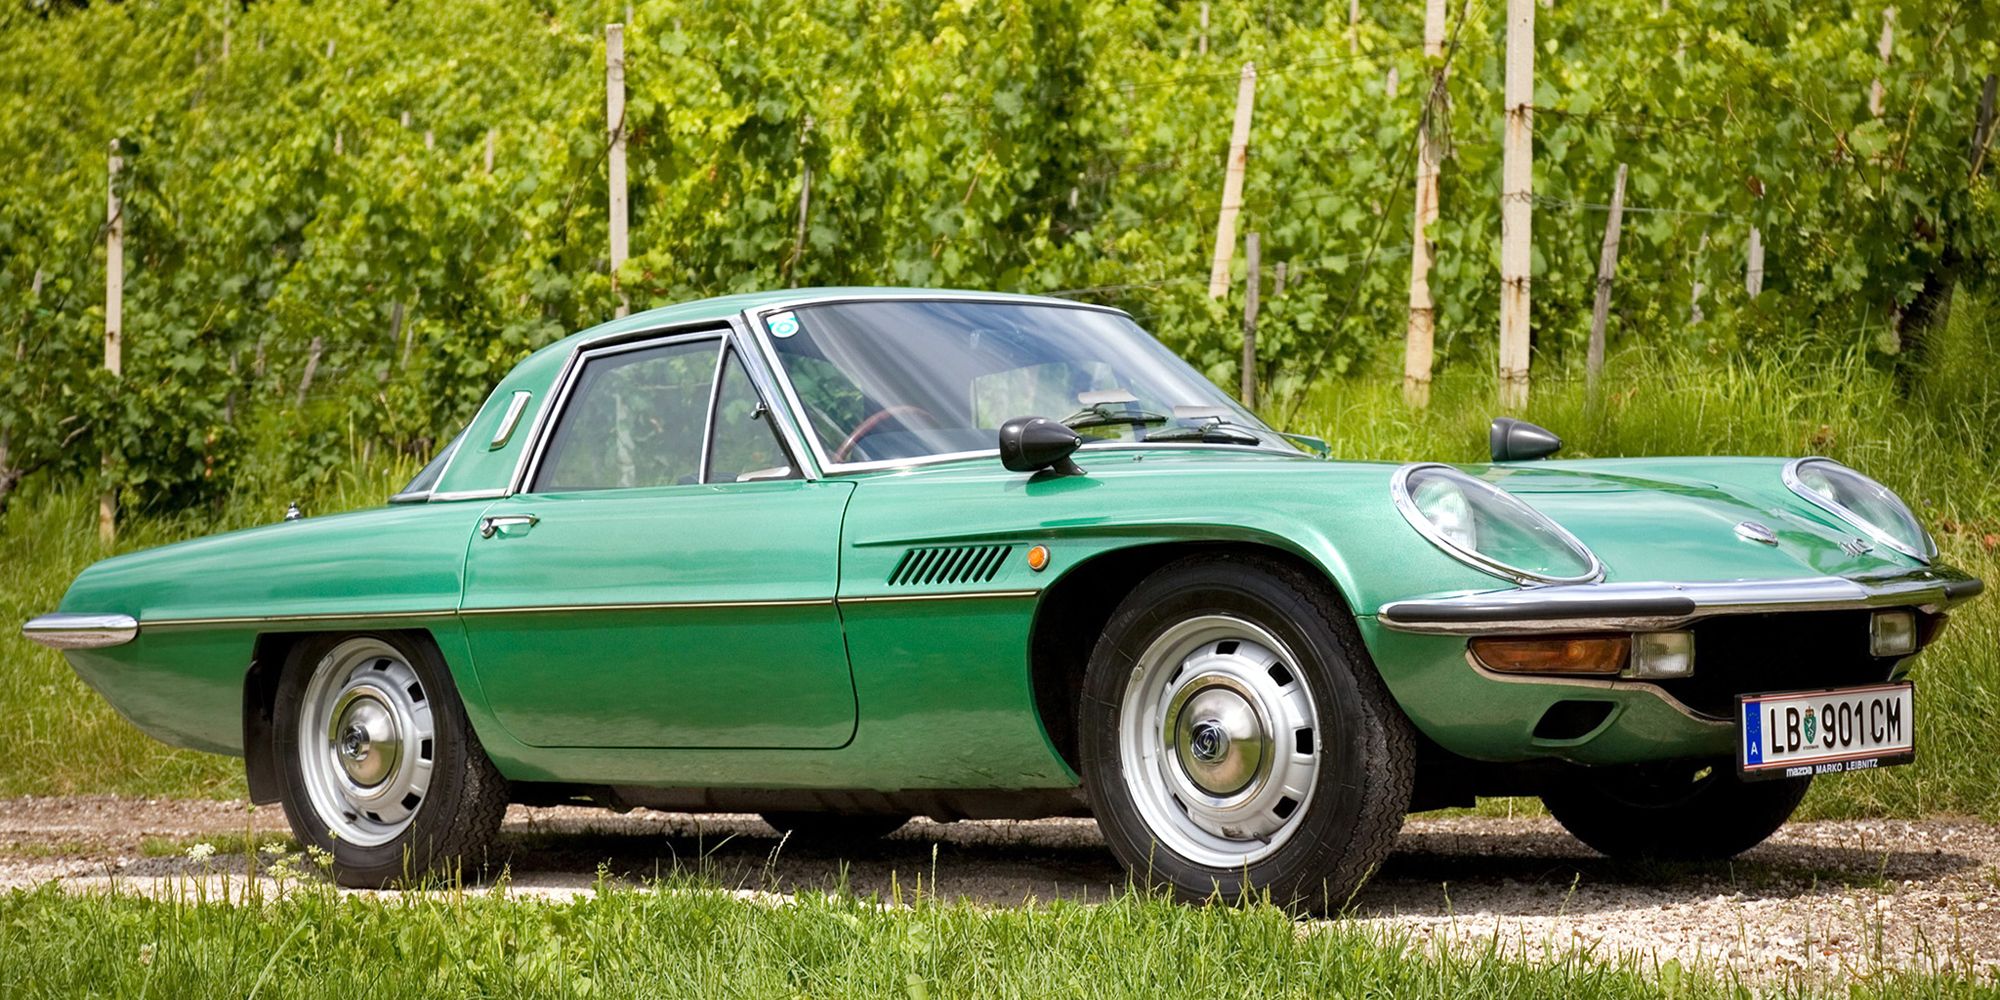 Front 3/4 view of the Cosmo 110S in green